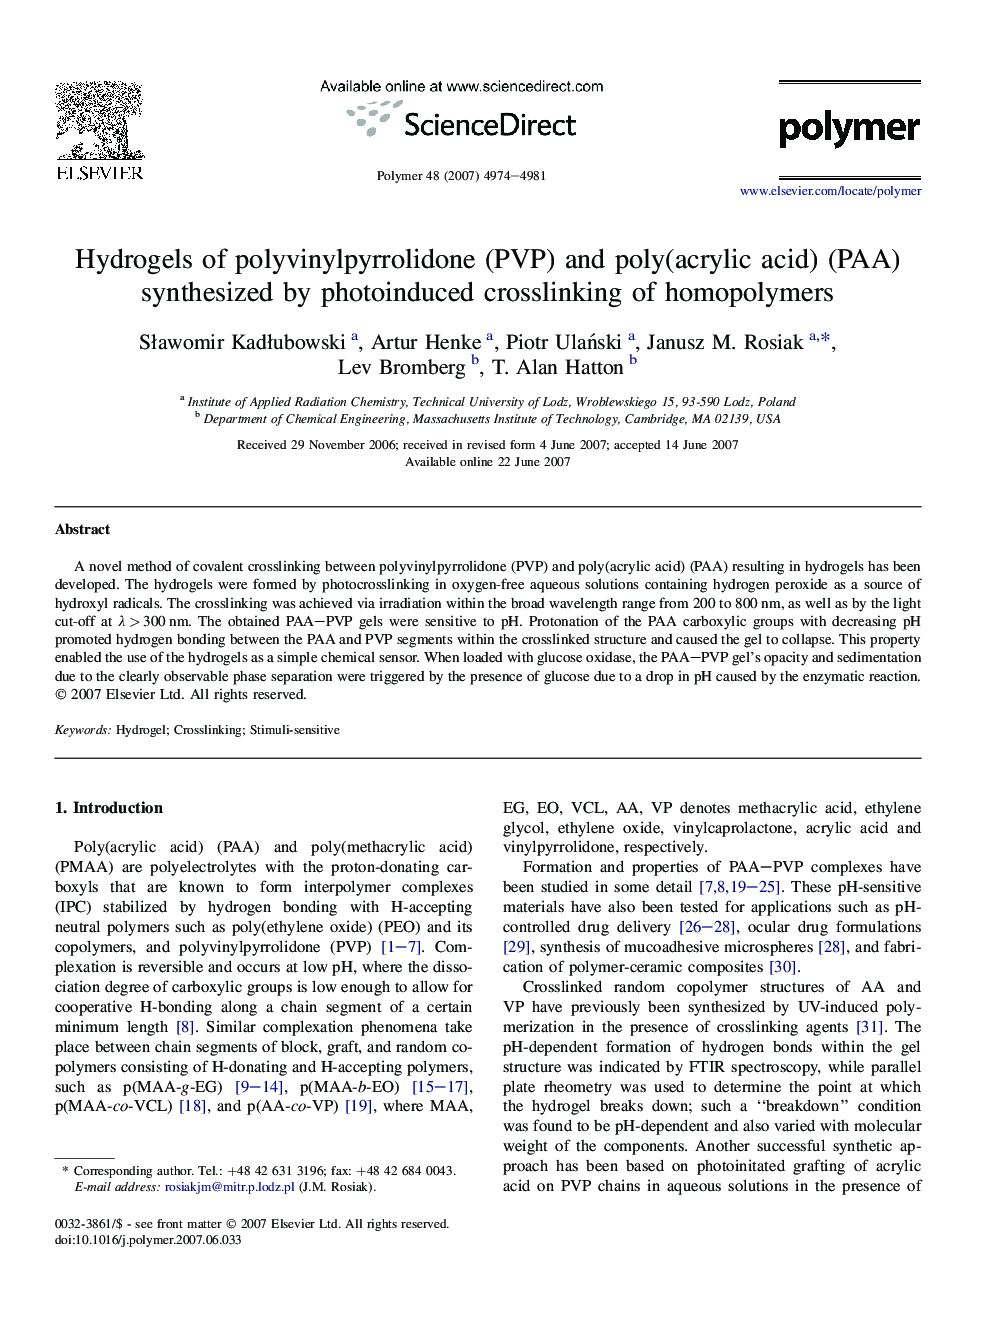 Hydrogels of polyvinylpyrrolidone (PVP) and poly(acrylic acid) (PAA) synthesized by photoinduced crosslinking of homopolymers